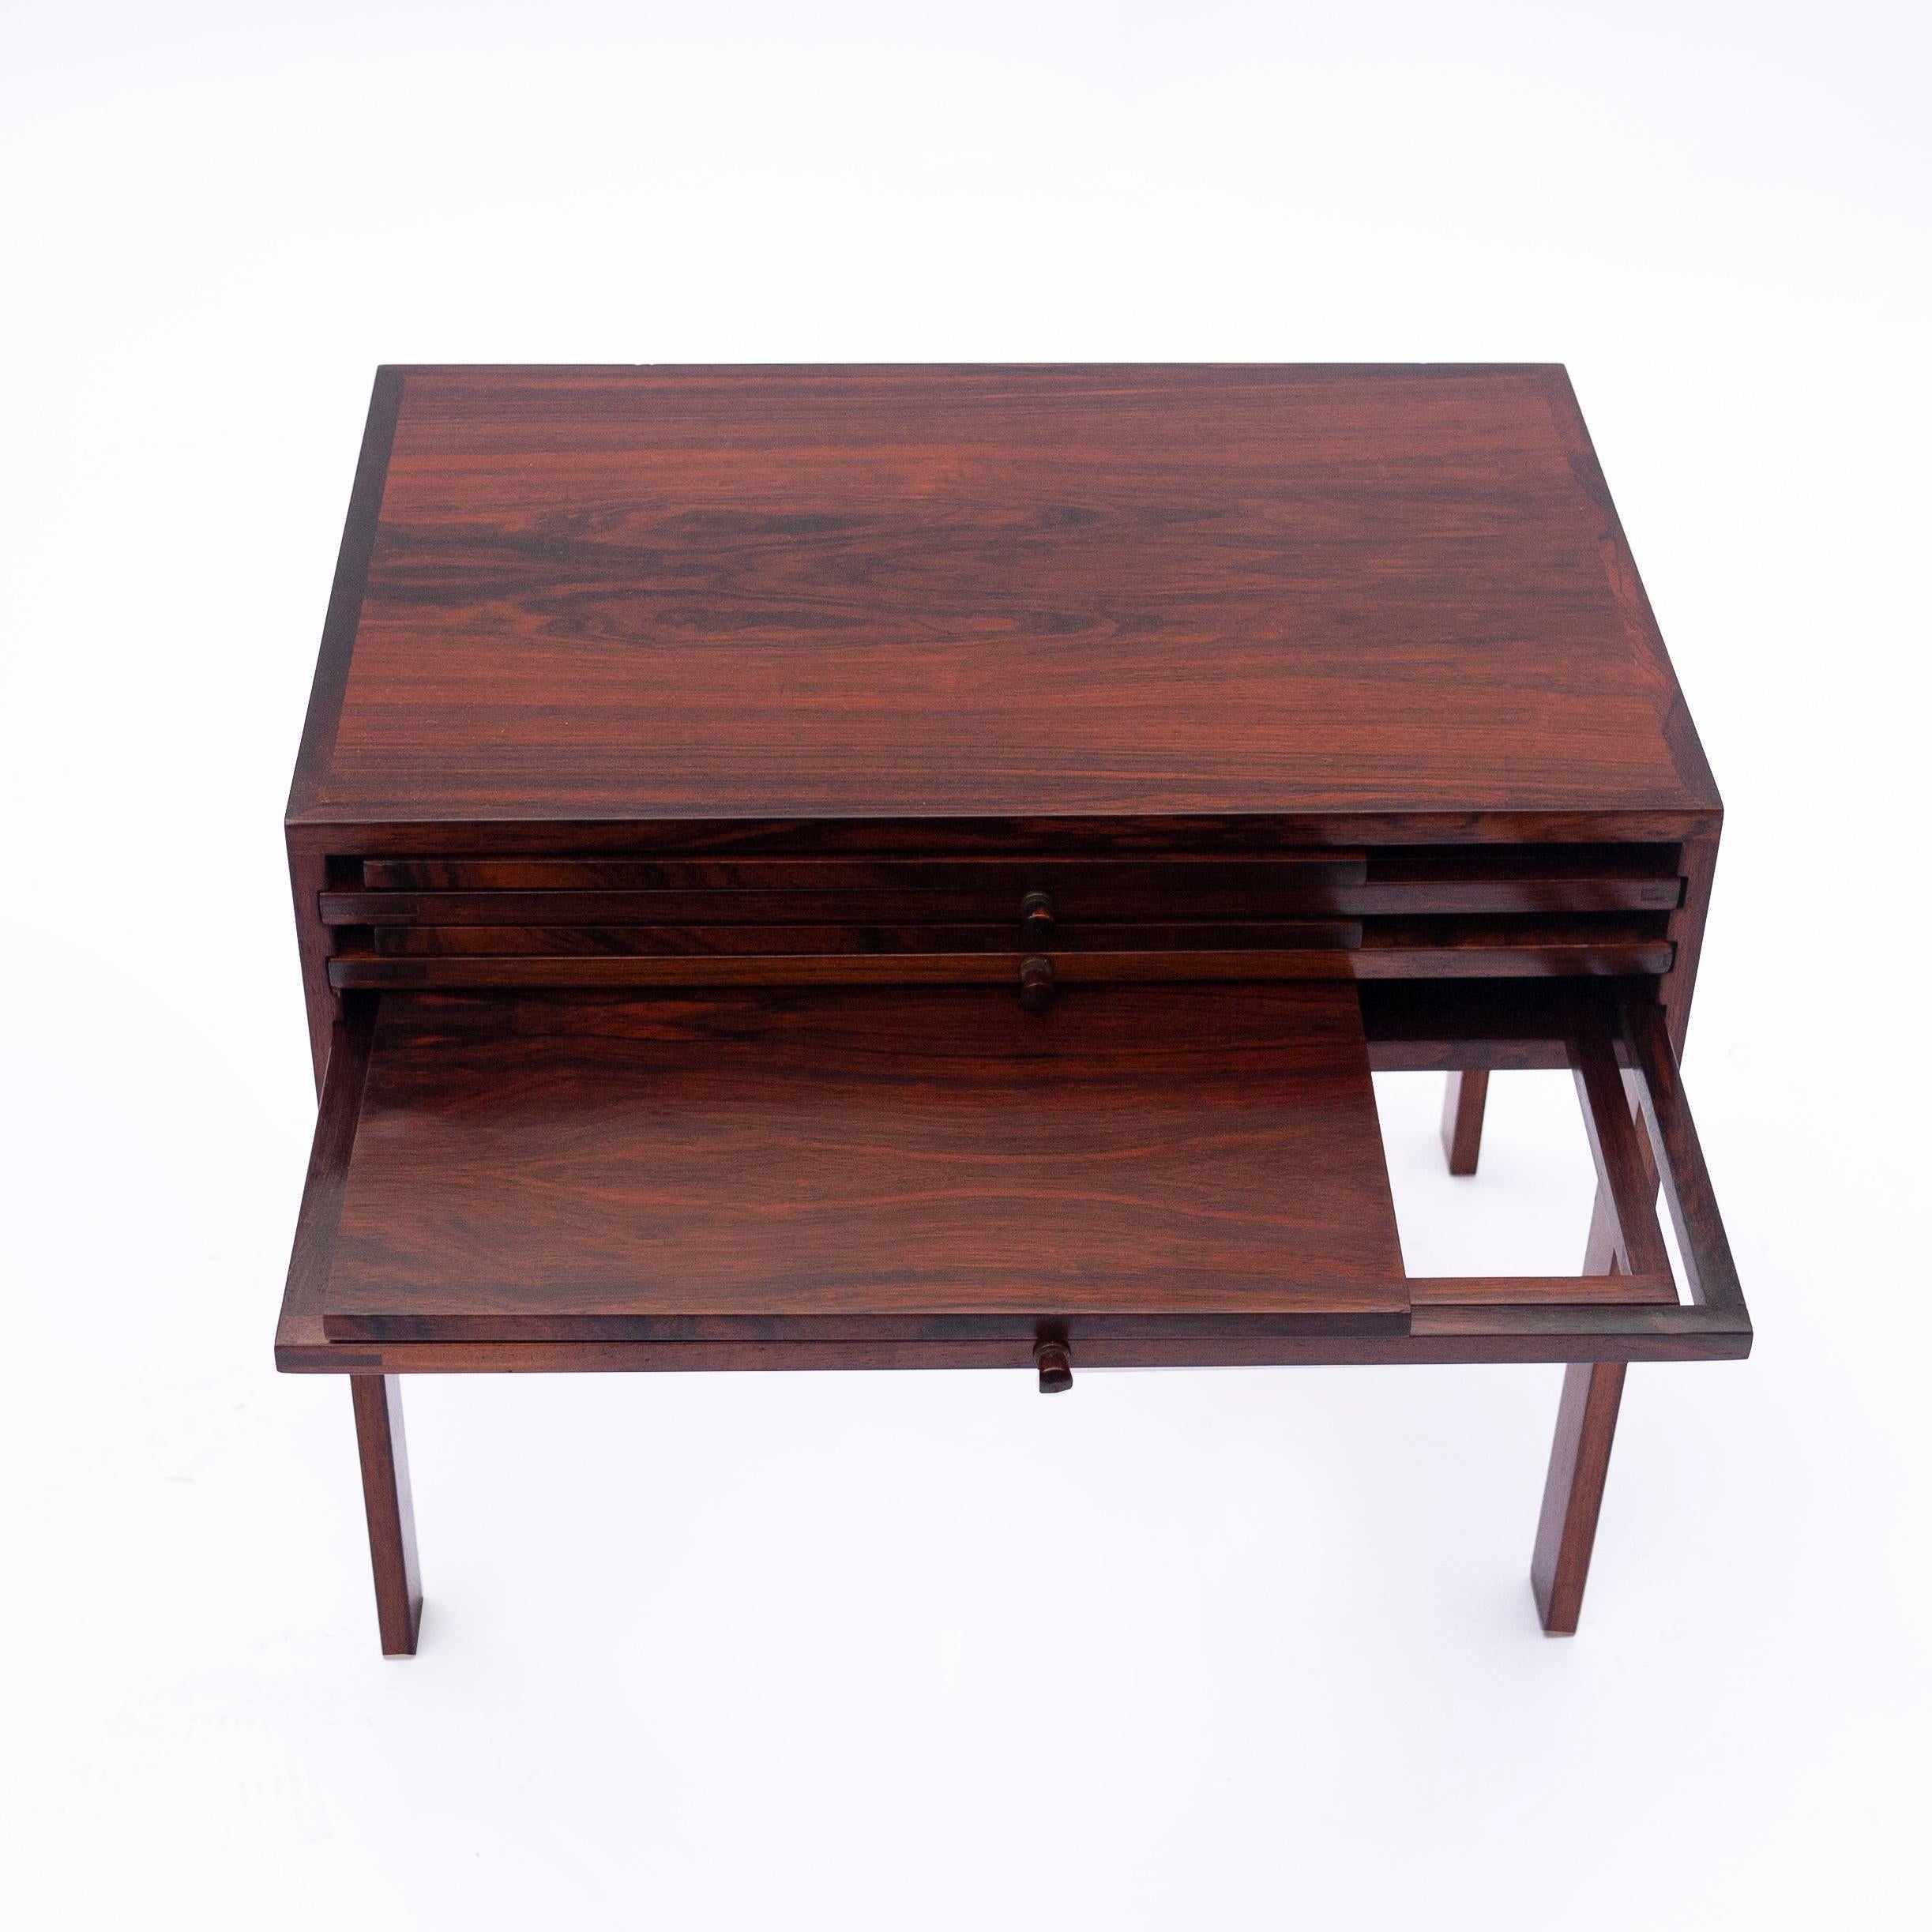 Scandinavian Nesting Tables and Side Table in Rosewood by Illum Wikkelsø, 1960s For Sale 6